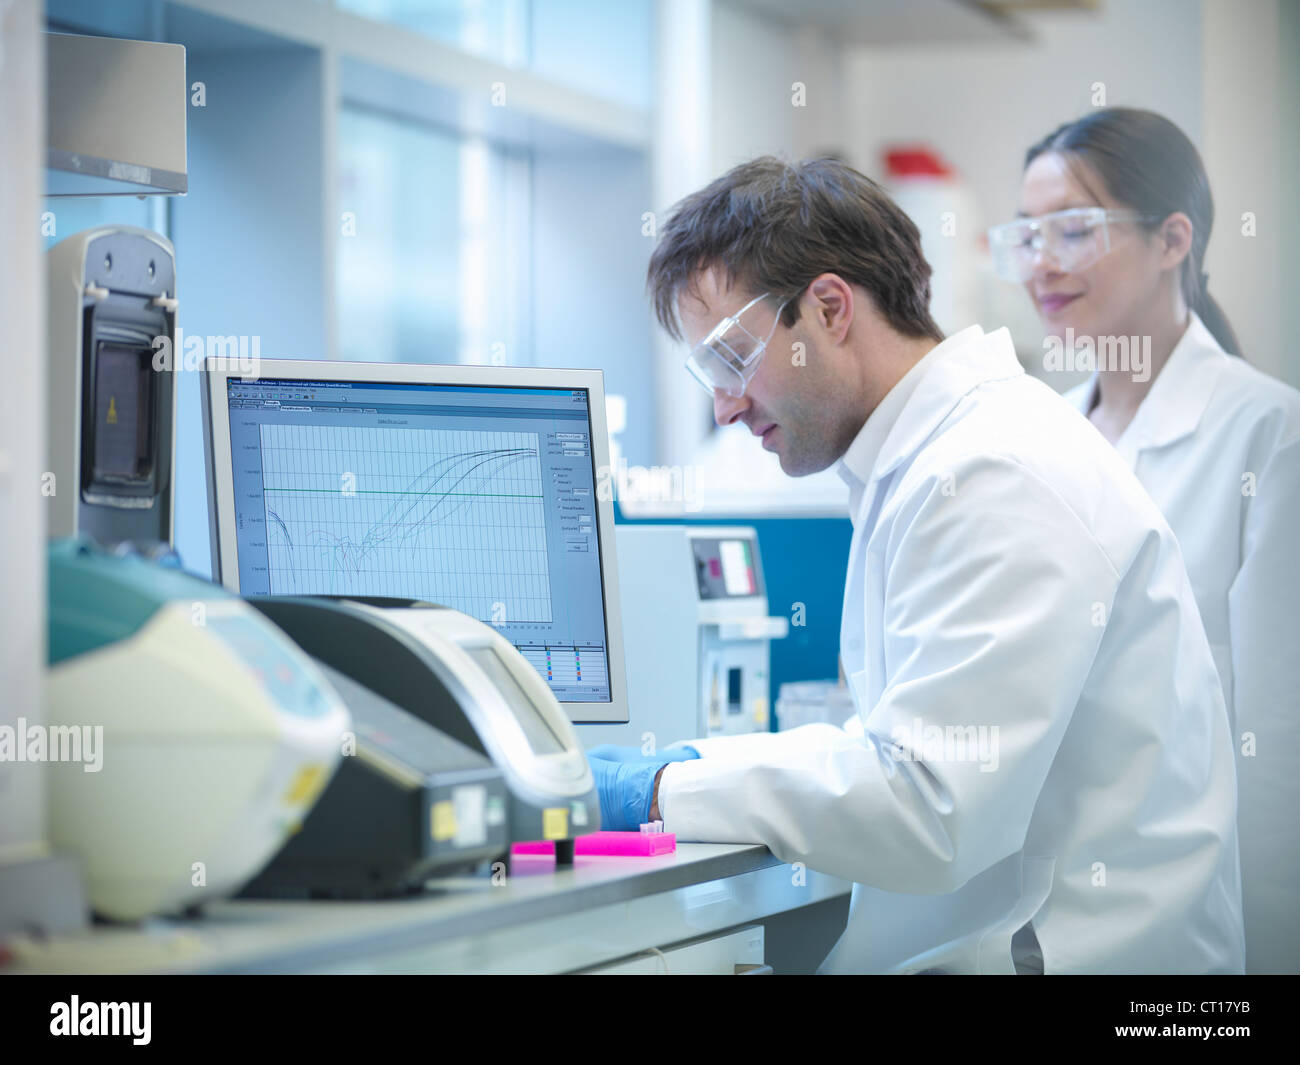 Scientist using computer in lab Stock Photo